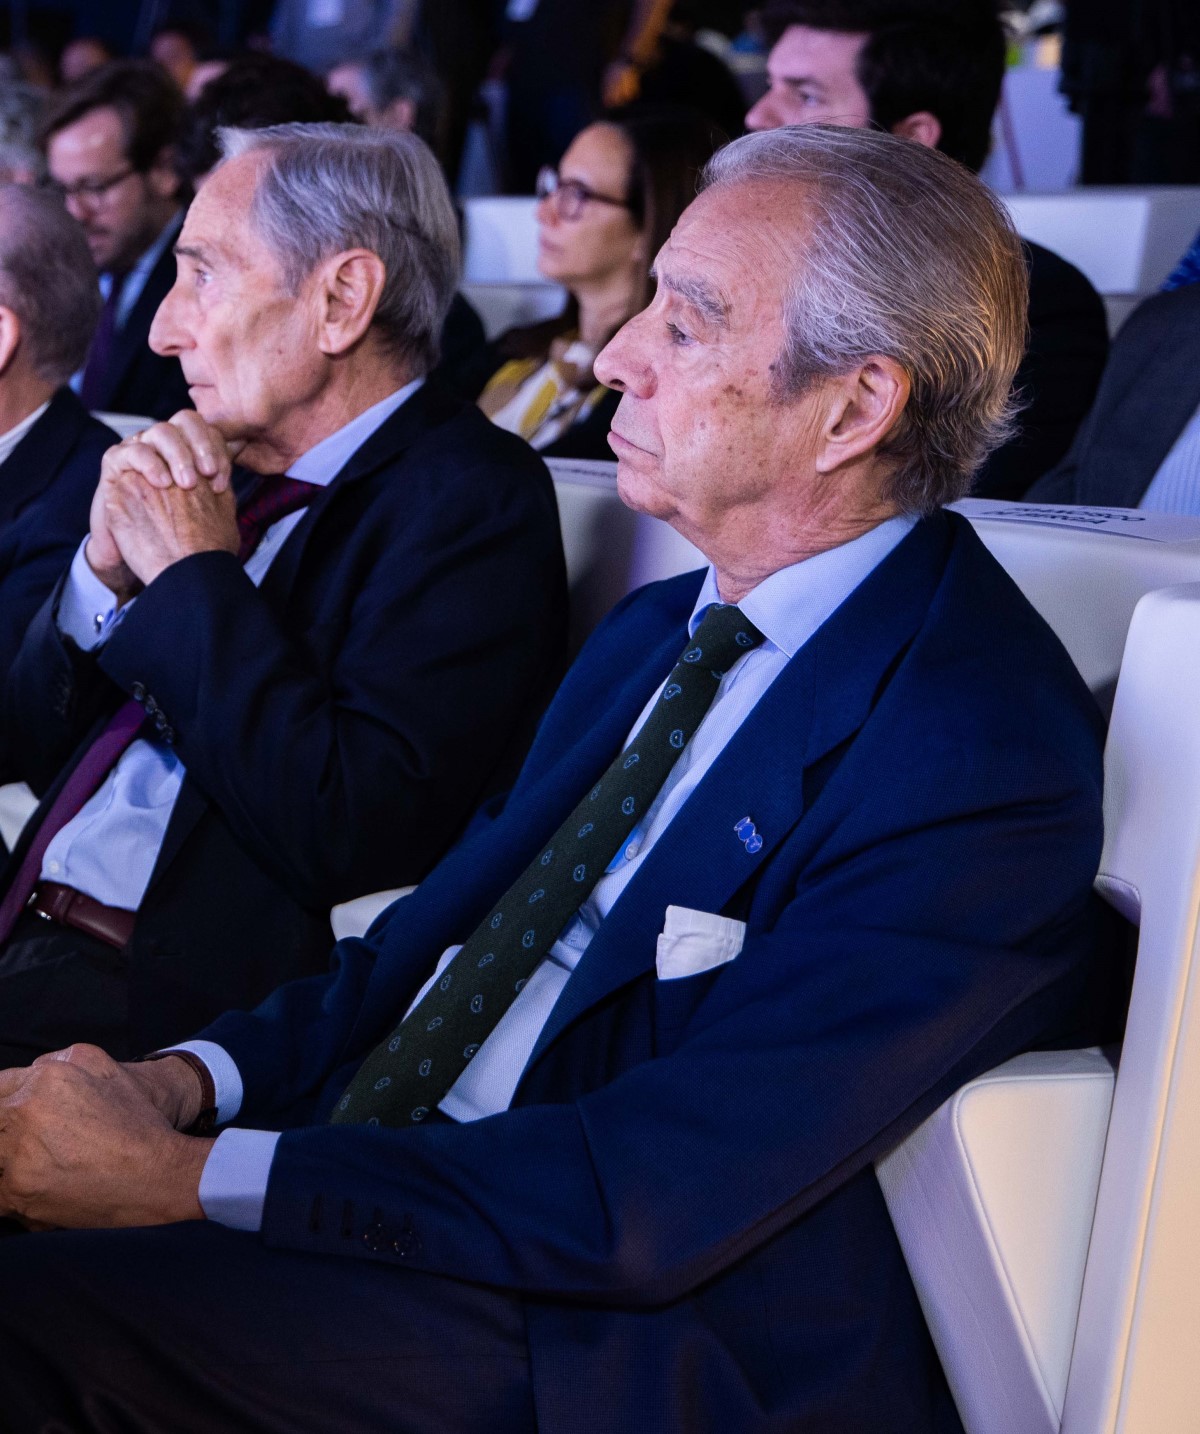 From right to left, Julio Linares, former Vice-President of Telefónica and currently a member of the Supervisory Board of Telefónica Germany and trustee of Fundación Telefónica, with Francisco Bergía, Director of Public Affairs.